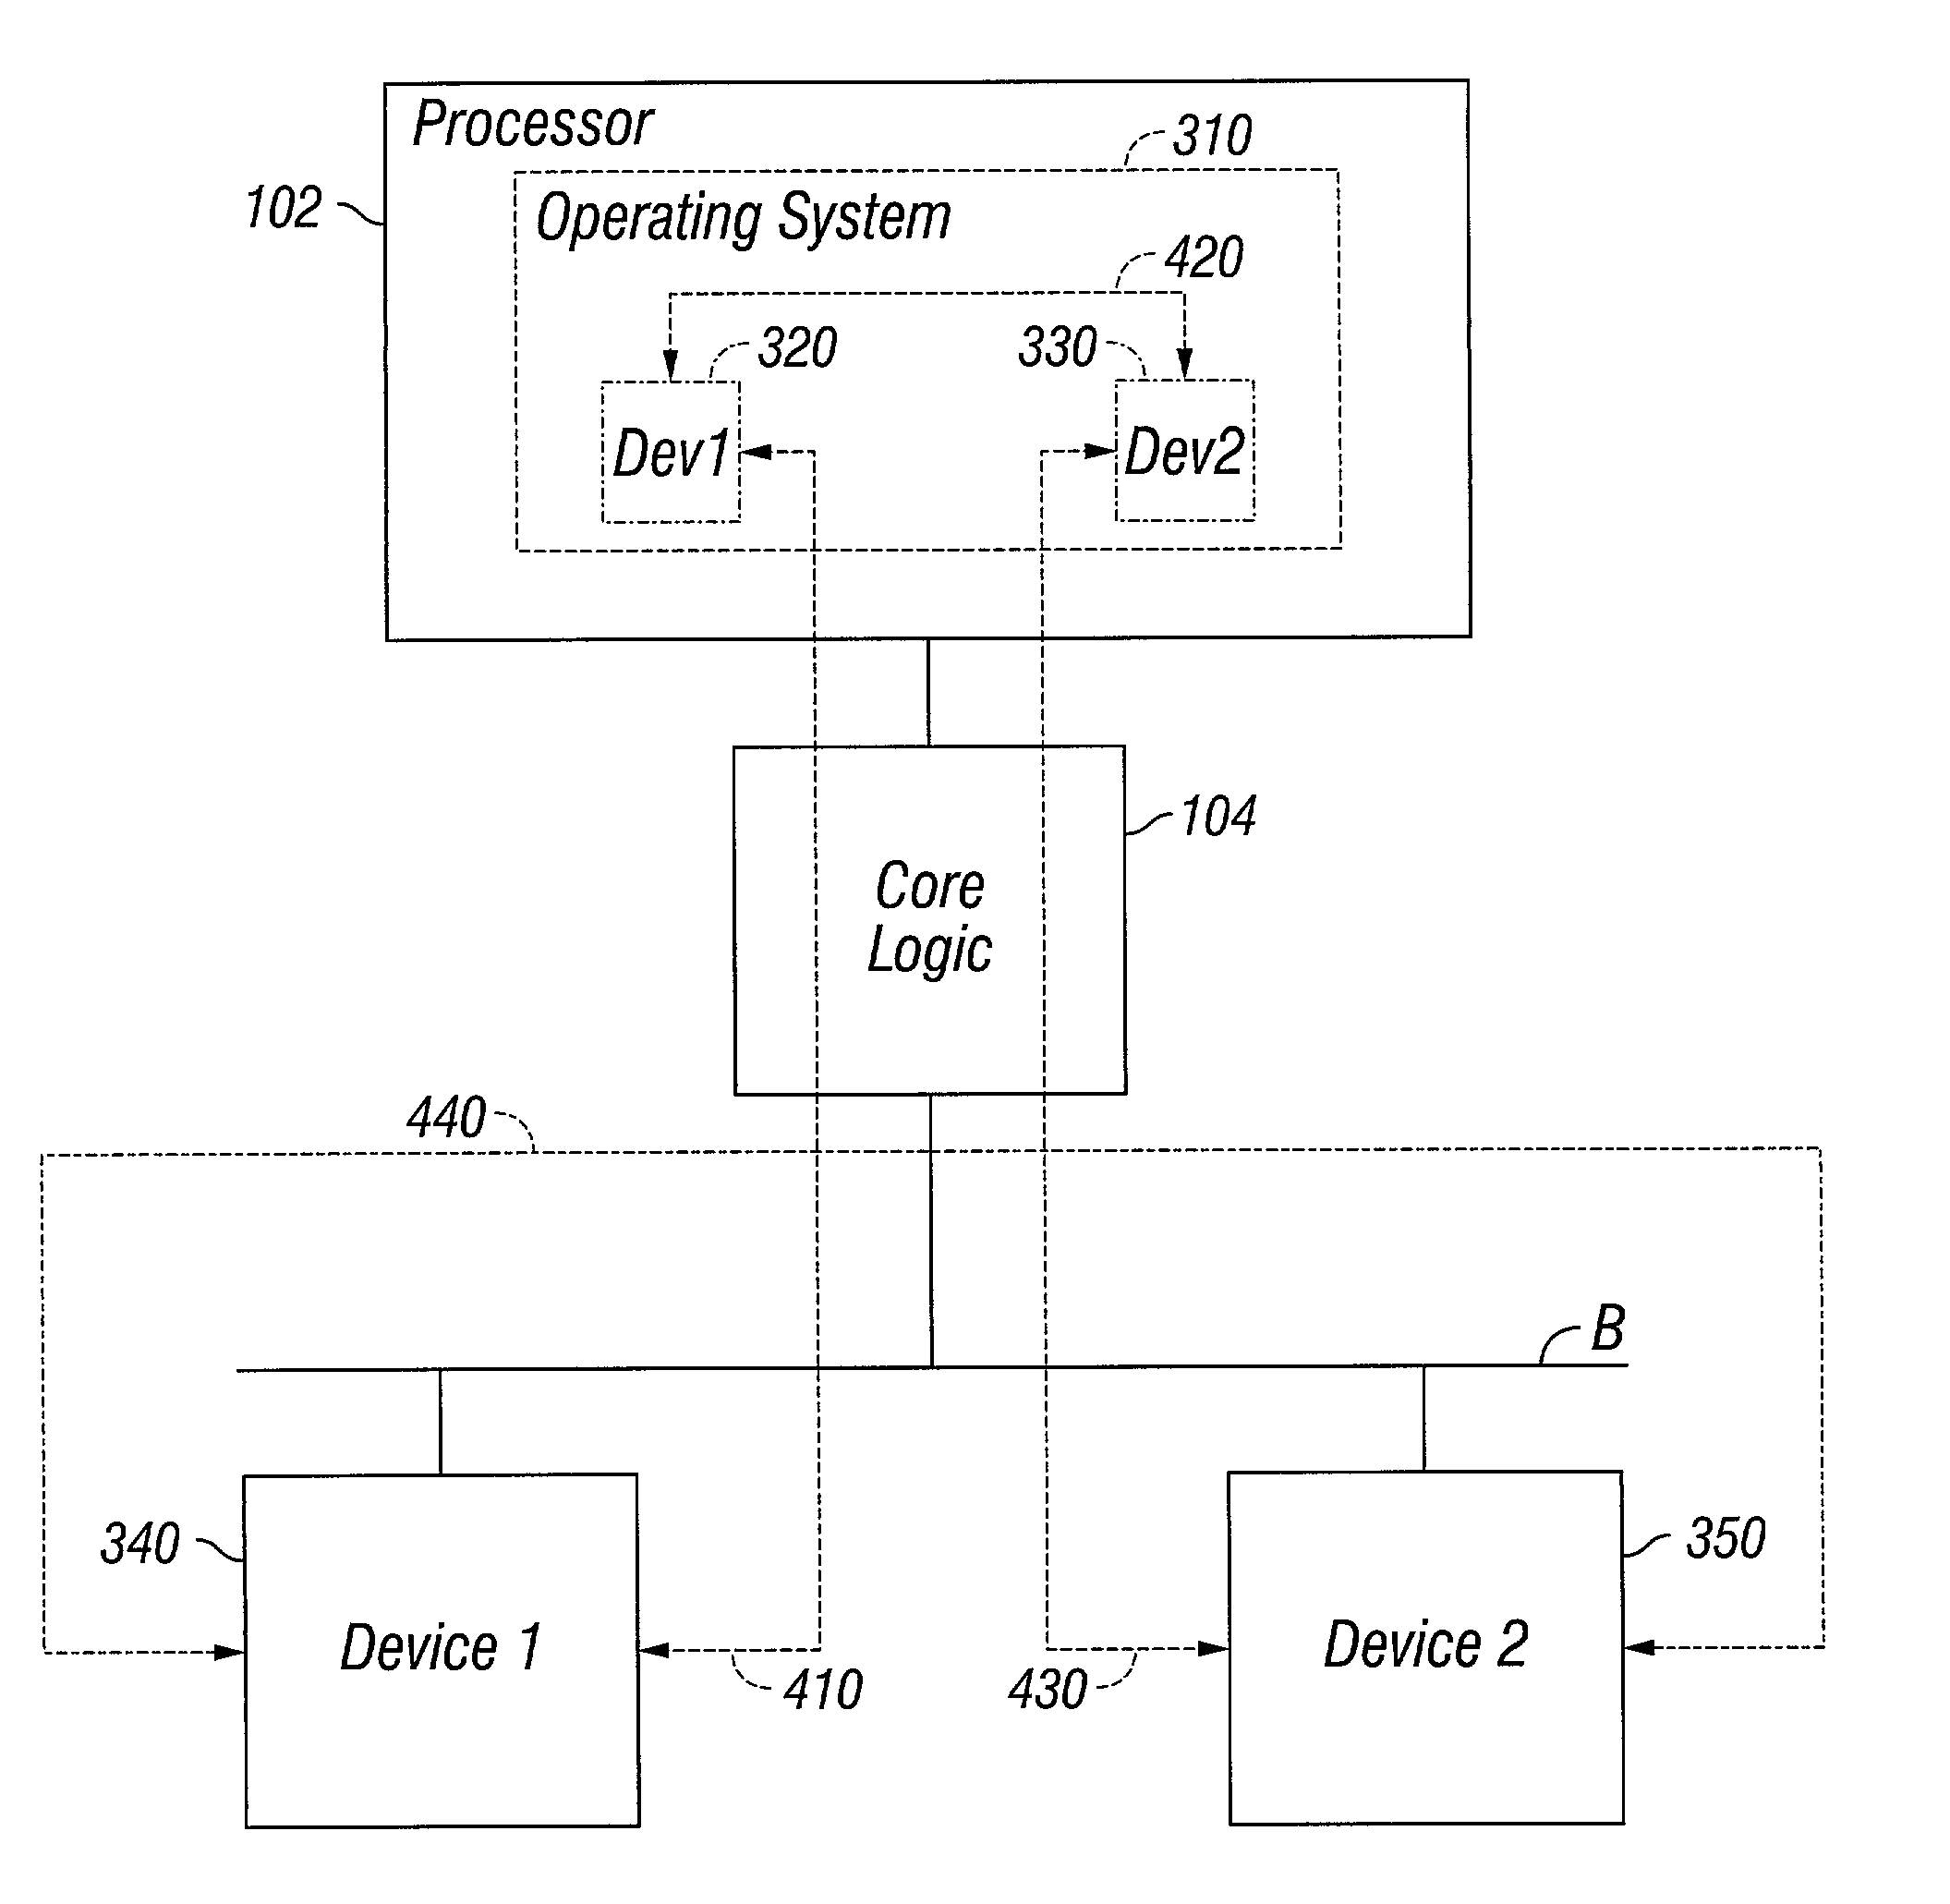 Distributed peer-to-peer communication for interconnect busses of a computer system